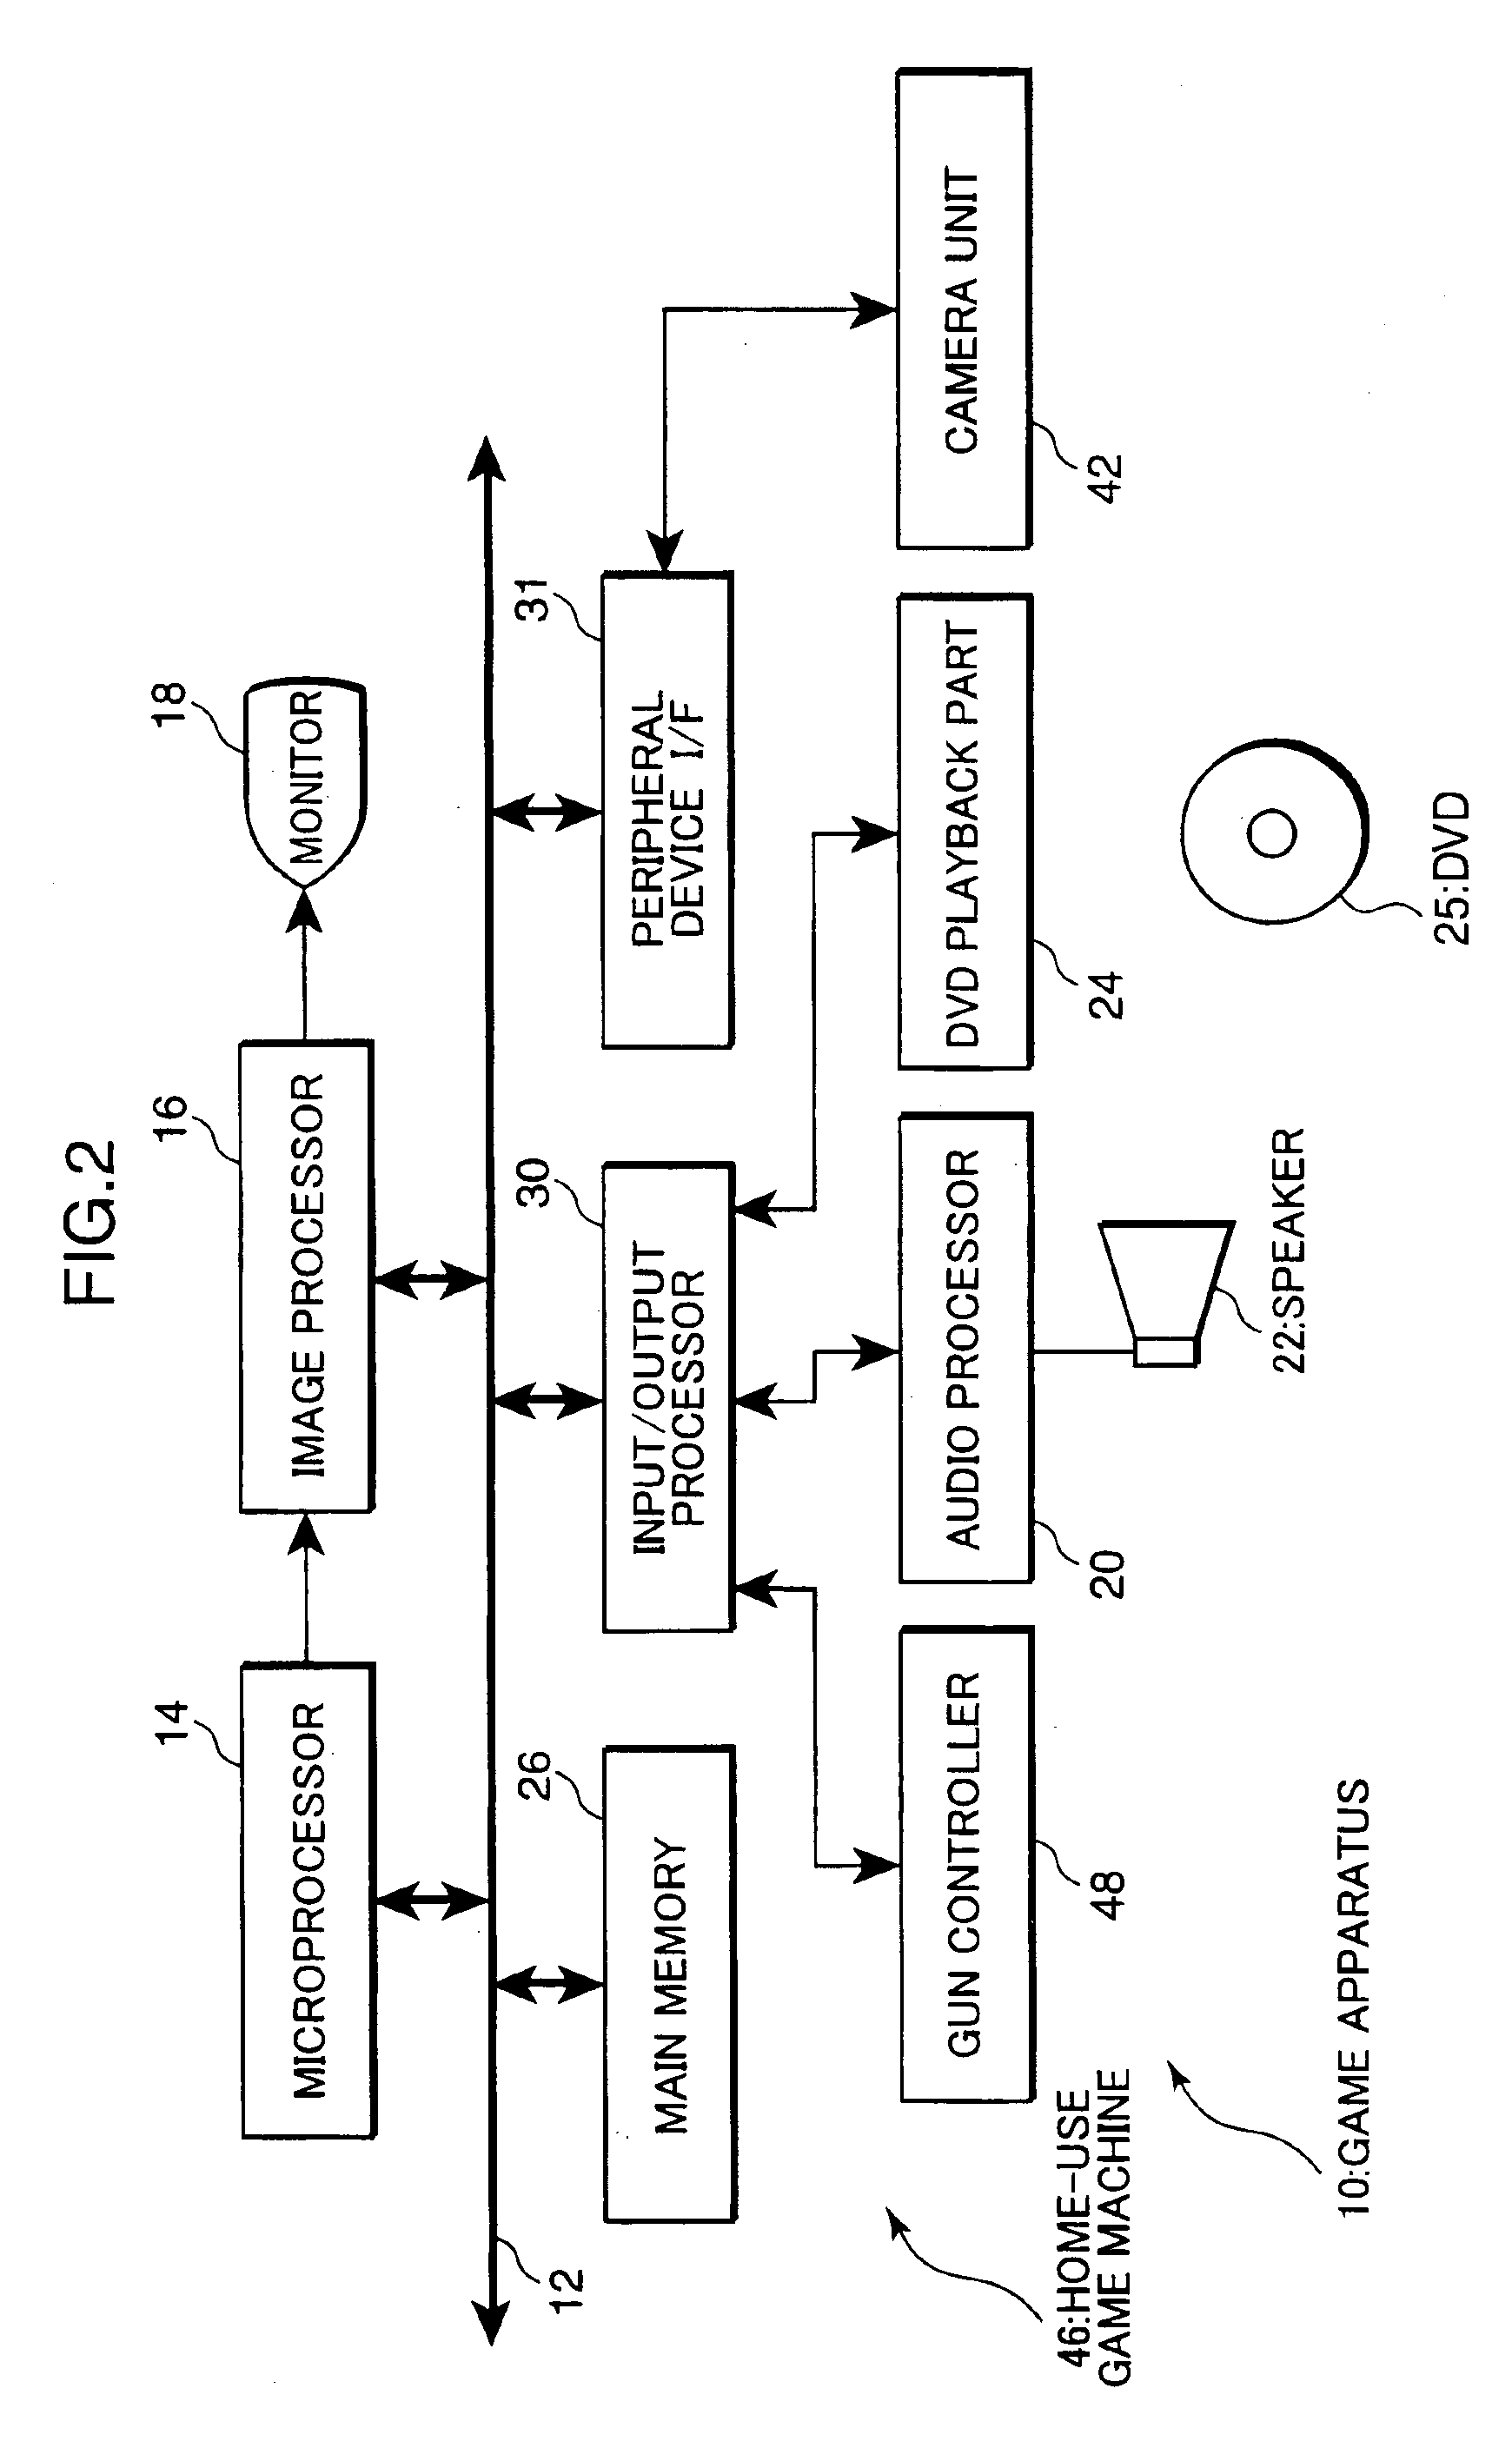 Video game apparatus, method and recording medium storing program for controlling viewpoint movement of simulated camera in video game